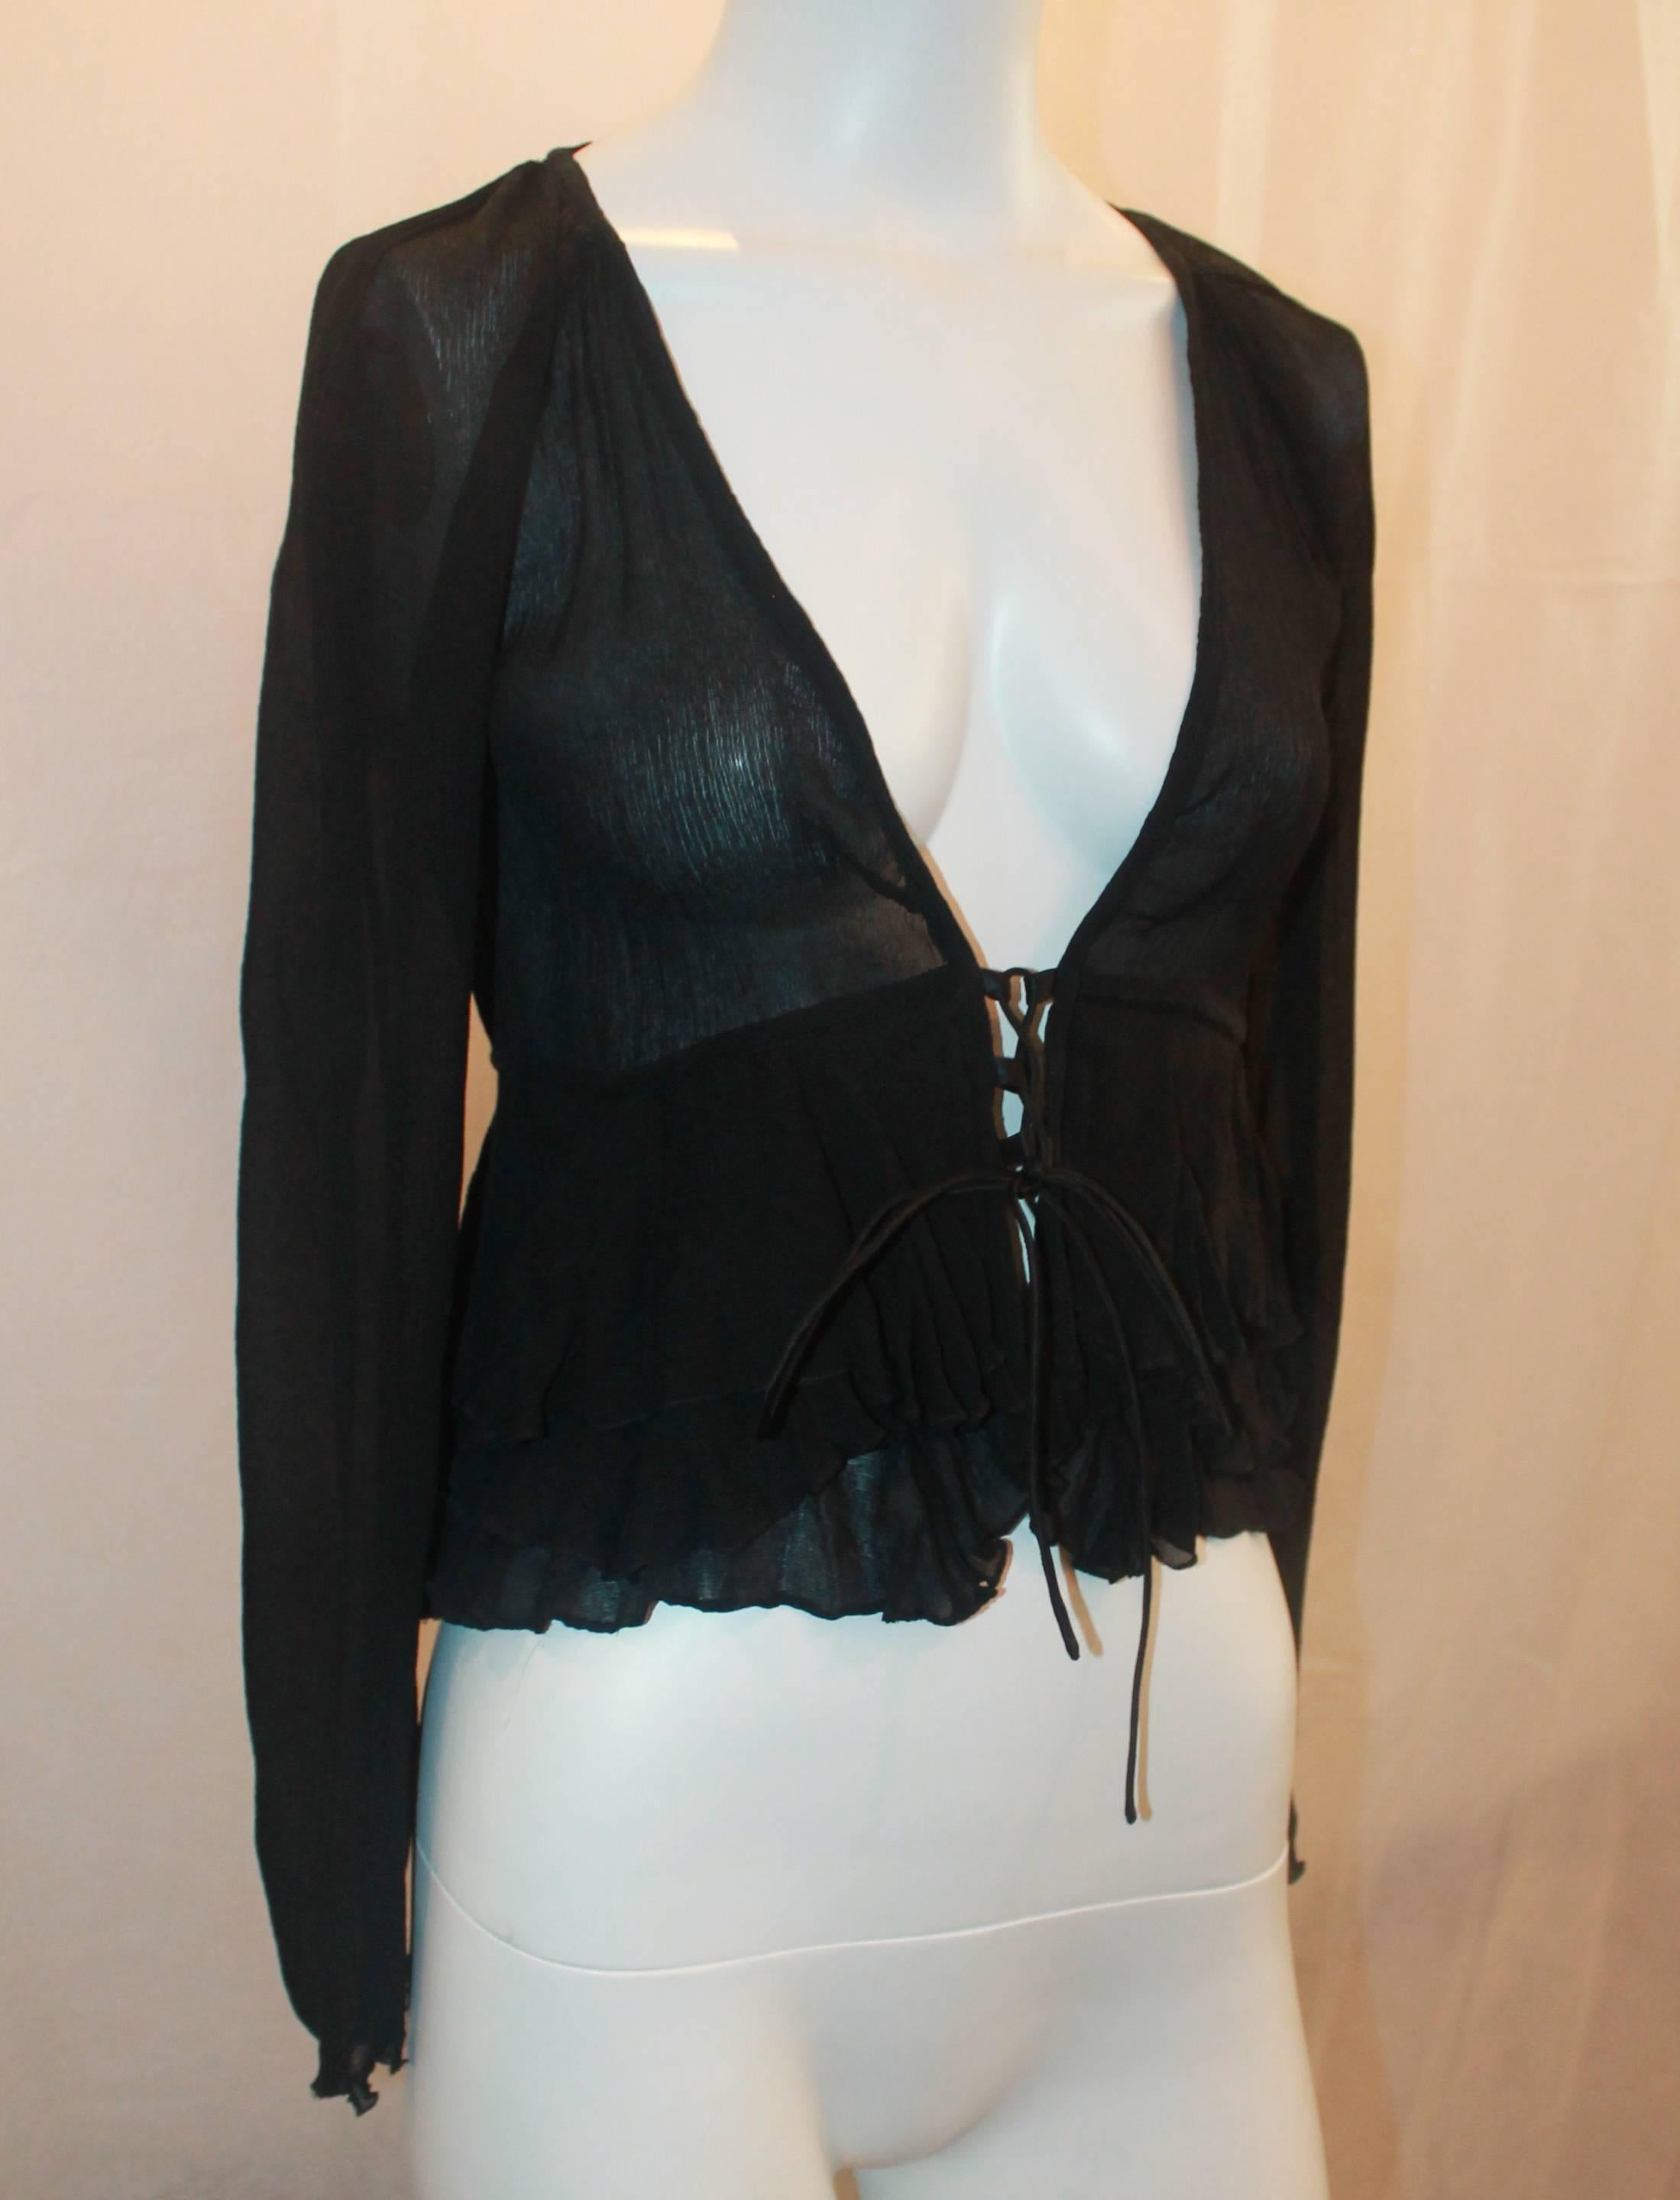 Gucci Black Silk Long Sleeve Blouse w/ Plunging Neckline - S.  This feminine top is in excellent condition.  It features a lovely black silk fabric, a plunging neckline, a lace-up tie closure, and tiered ruffles at the